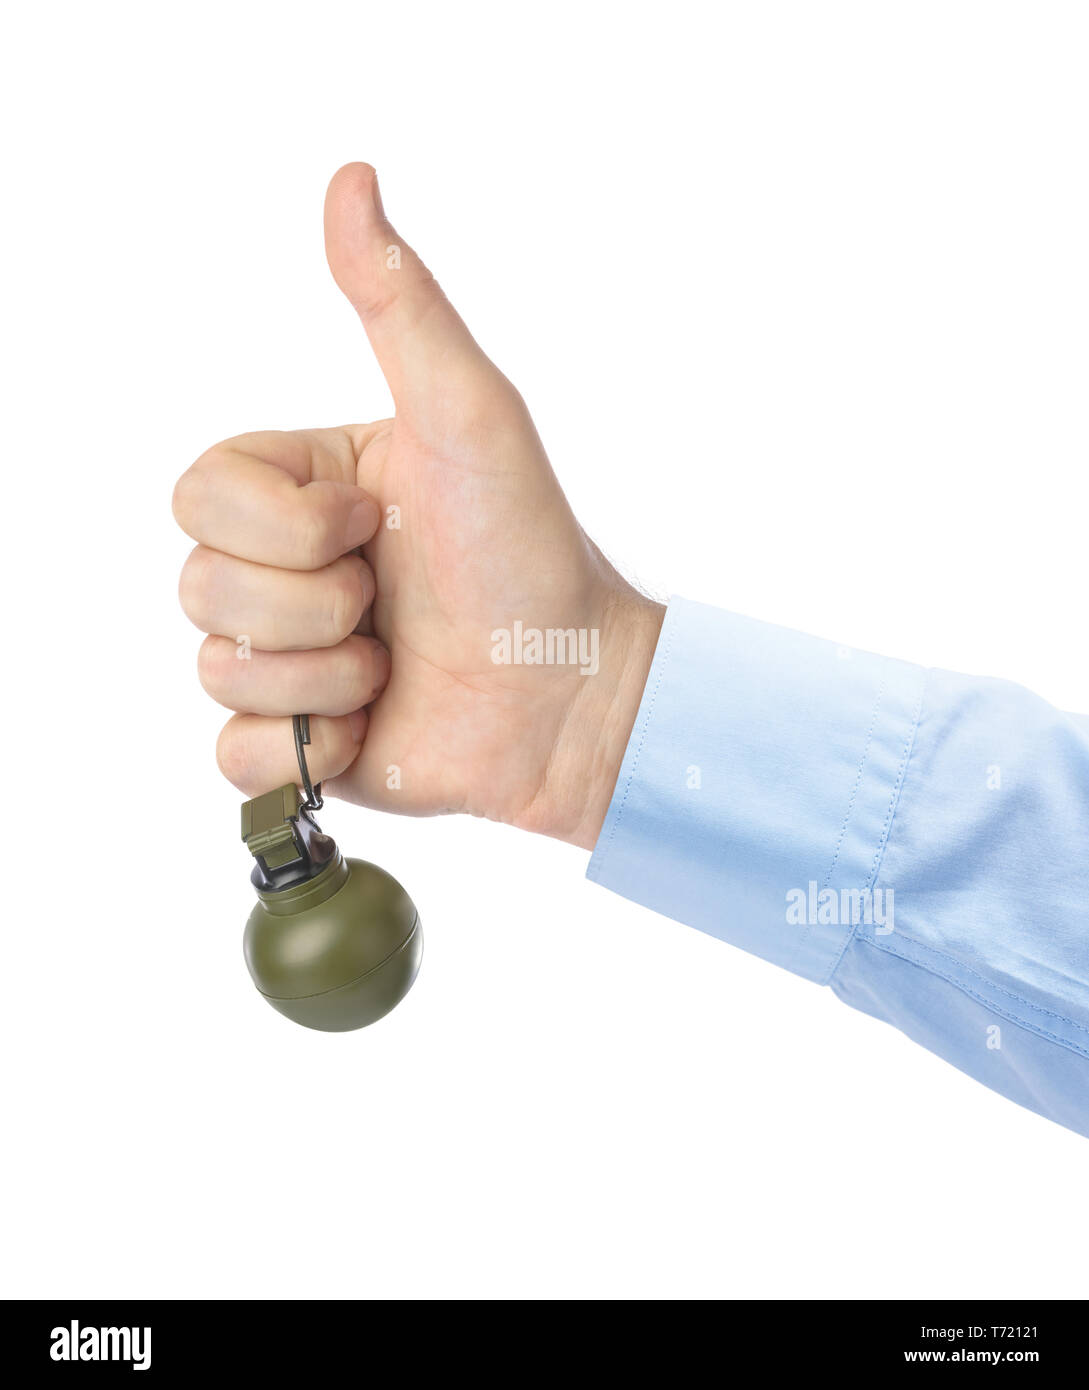 Thumb up hand with grenade Stock Photo